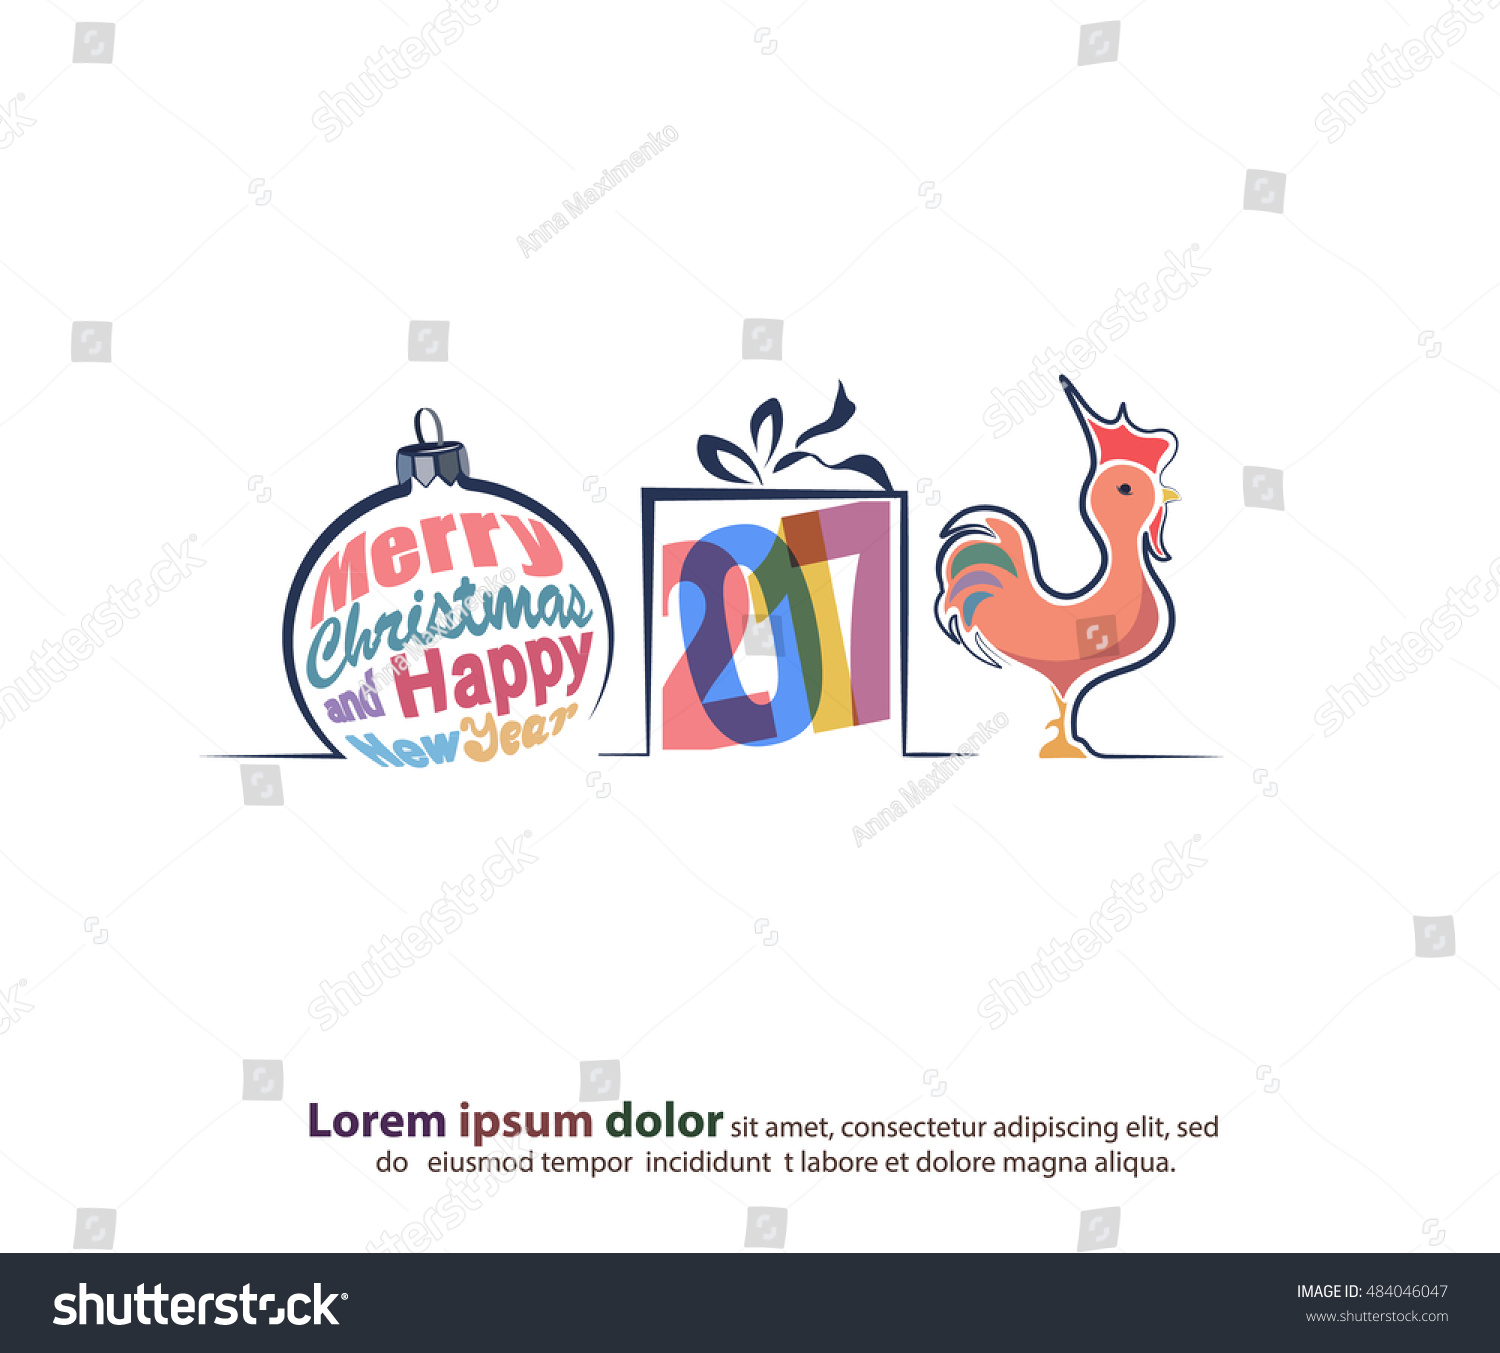 Merry Christmas and Happy New Year border in a shape of three main symbols such as